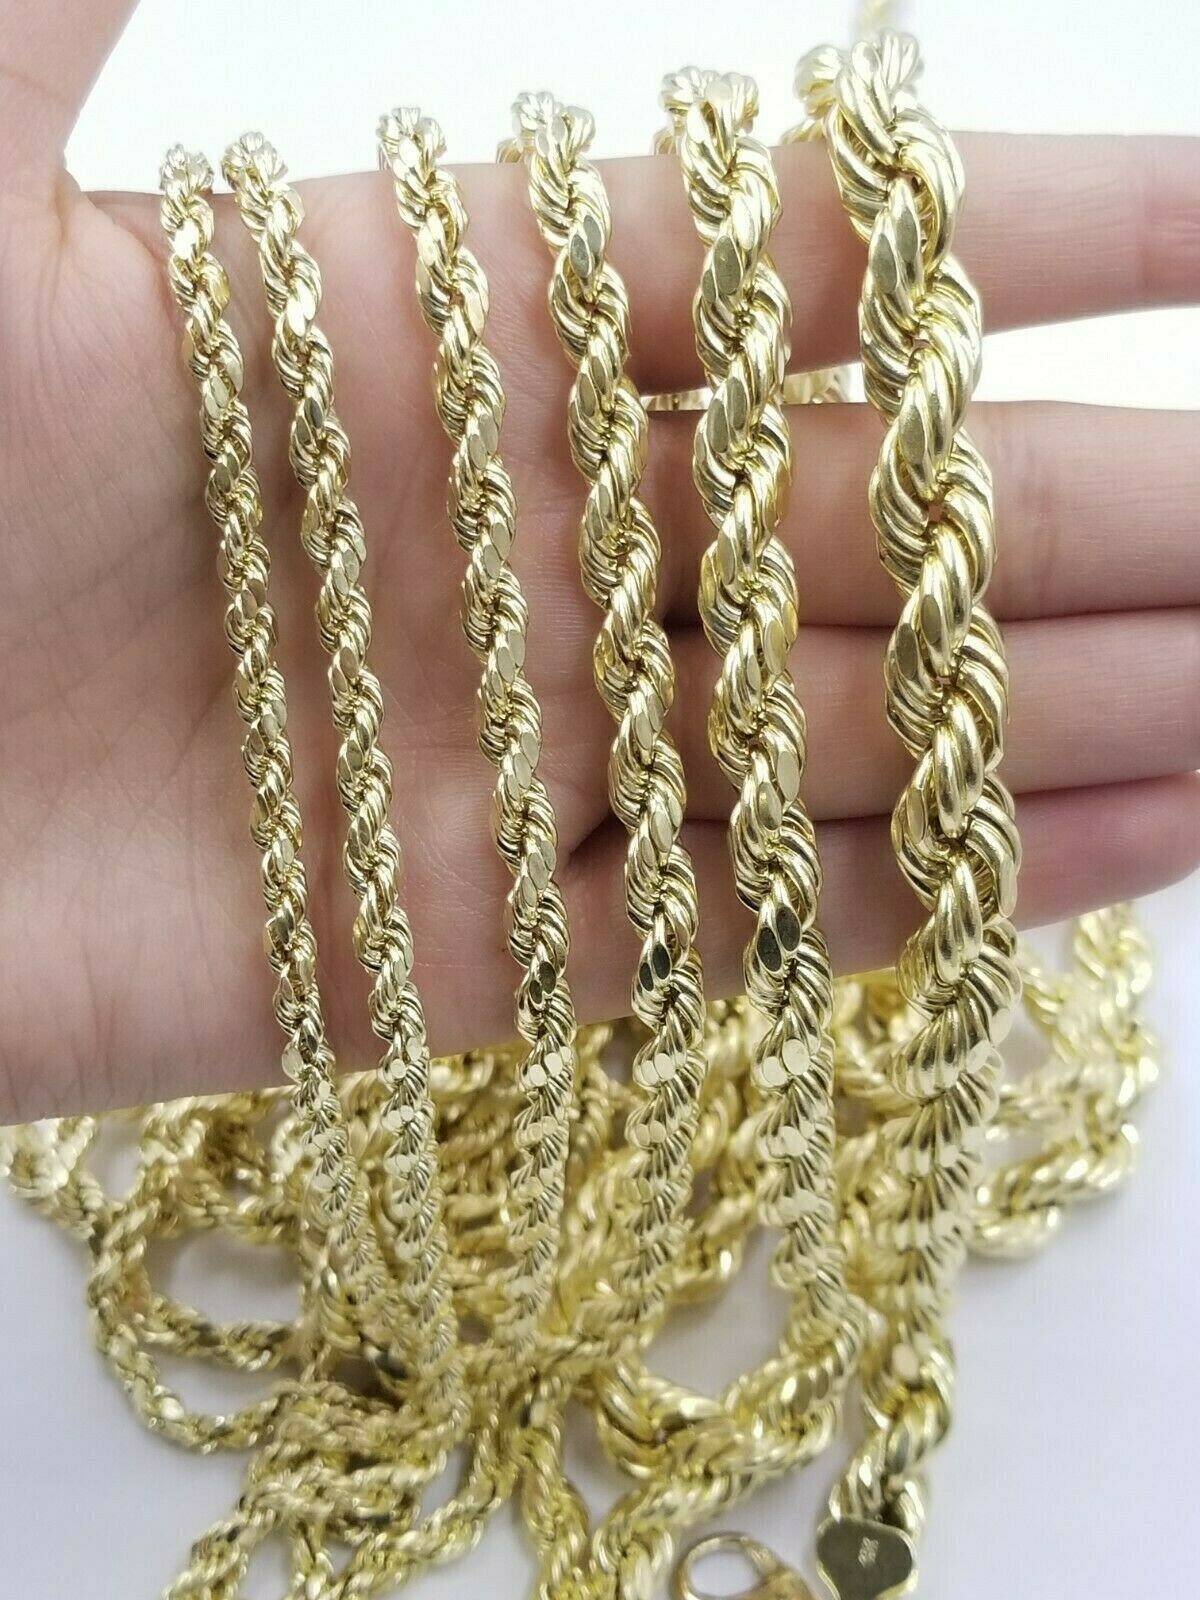 10k Yellow Gold Rope Chain Necklace Men Women 18